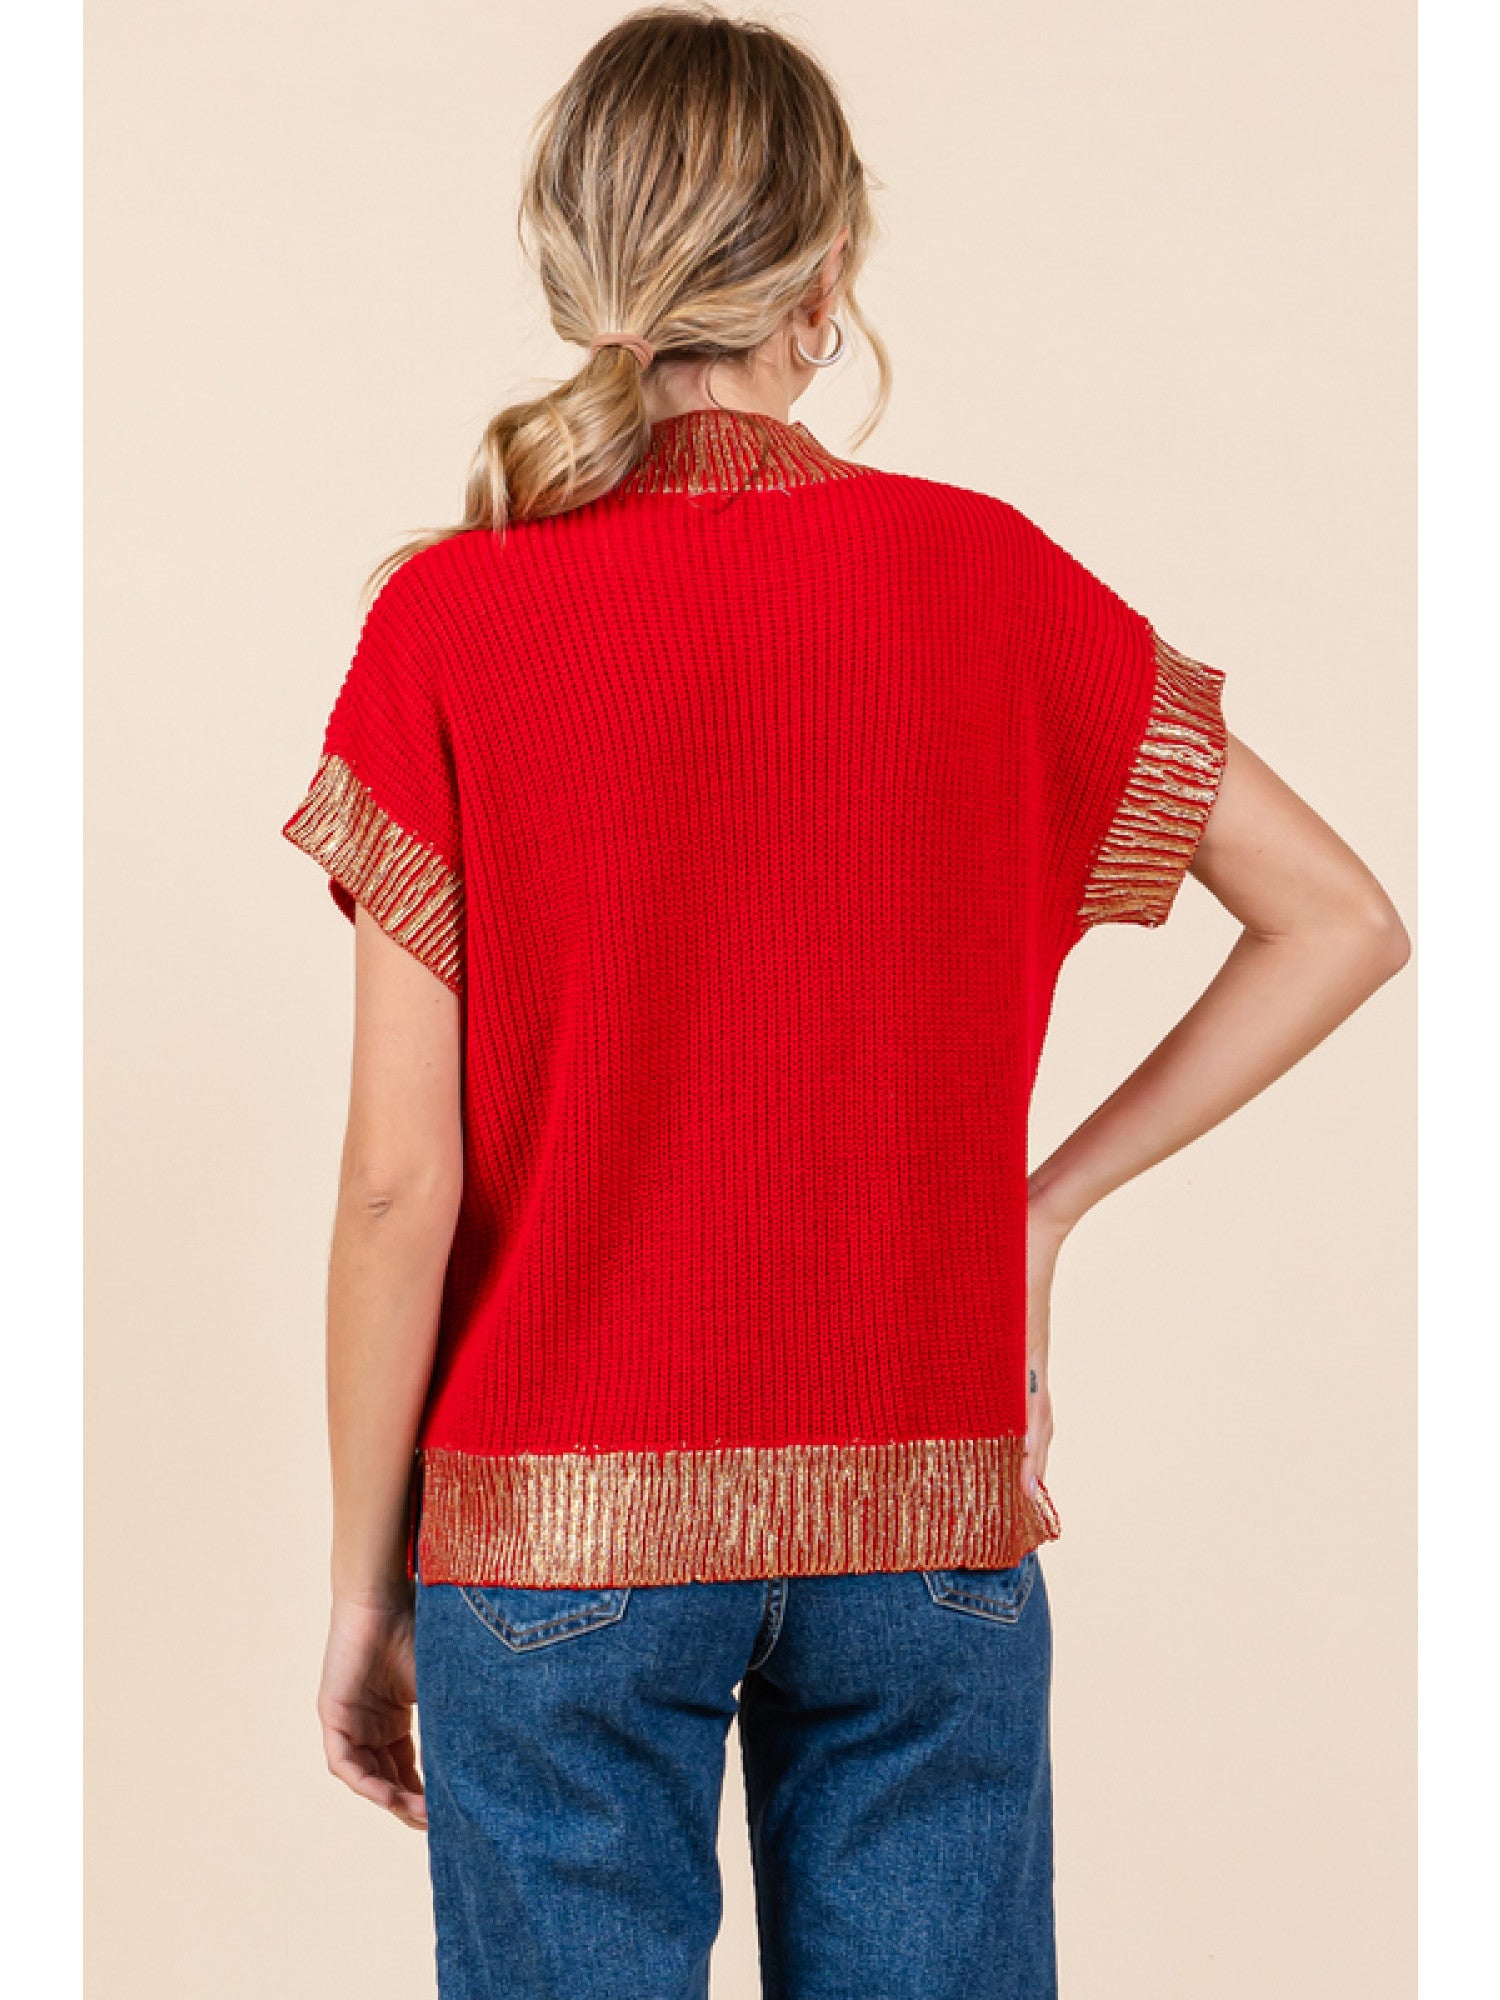 Metallic Detail Solid Knit Top Tomato Red